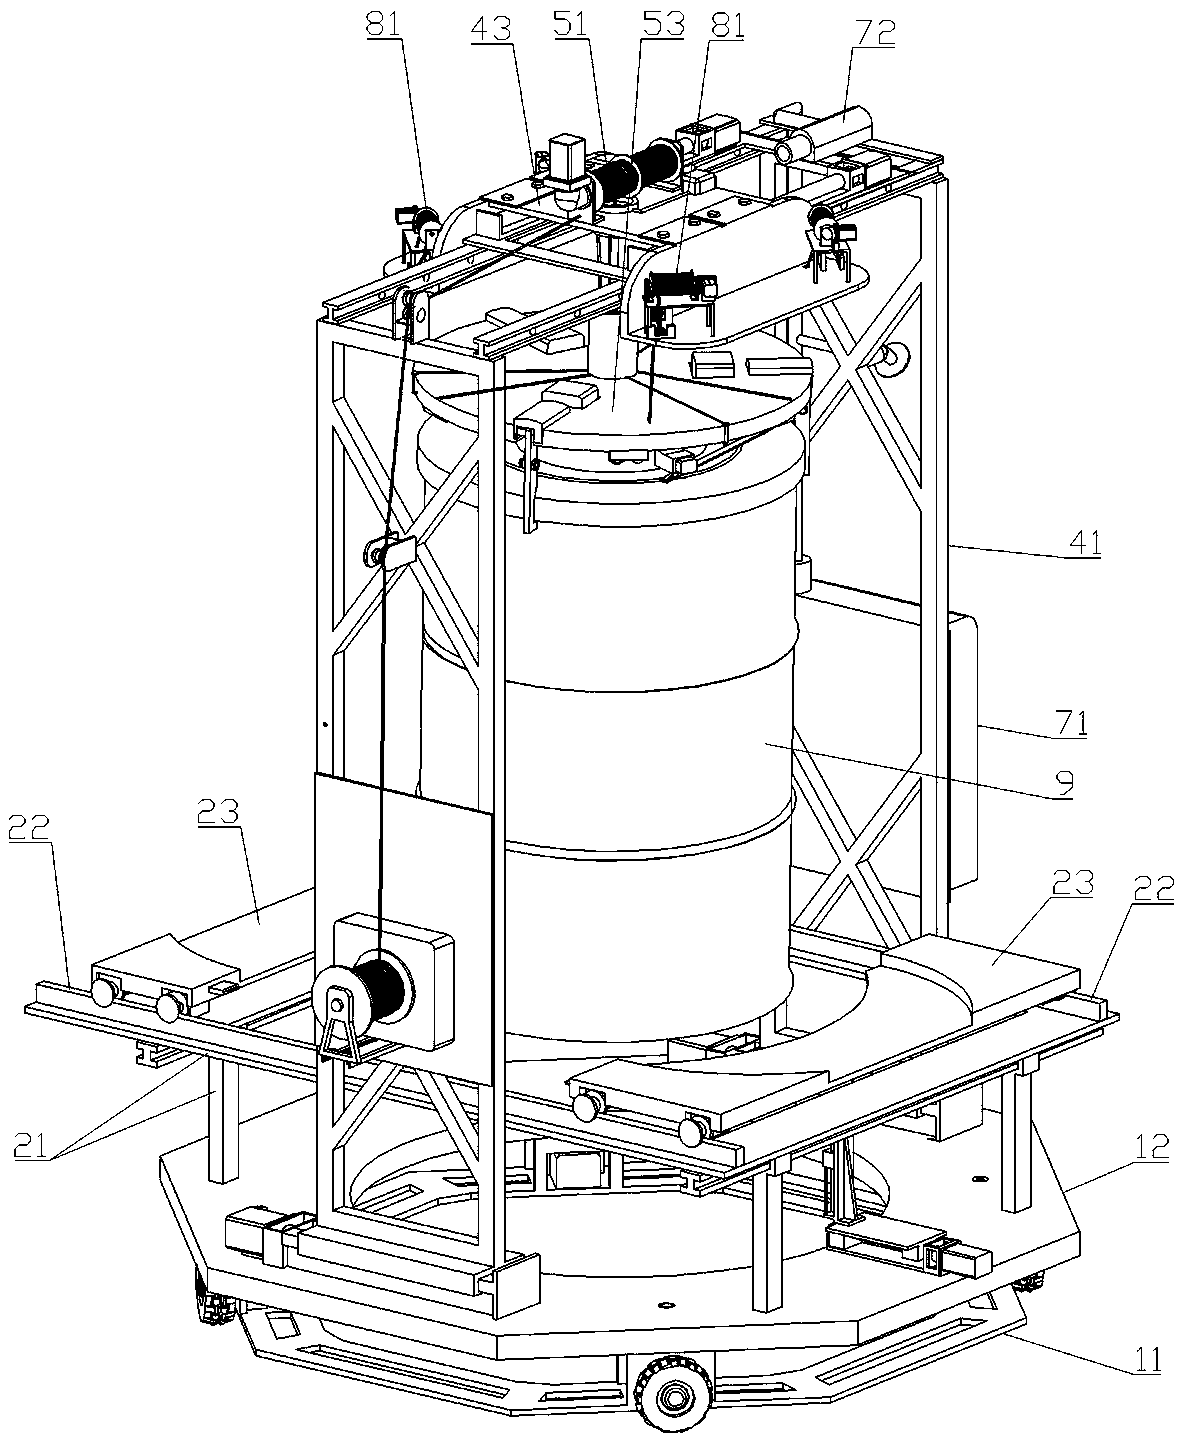 Deep well curing barrel hoisting system and method